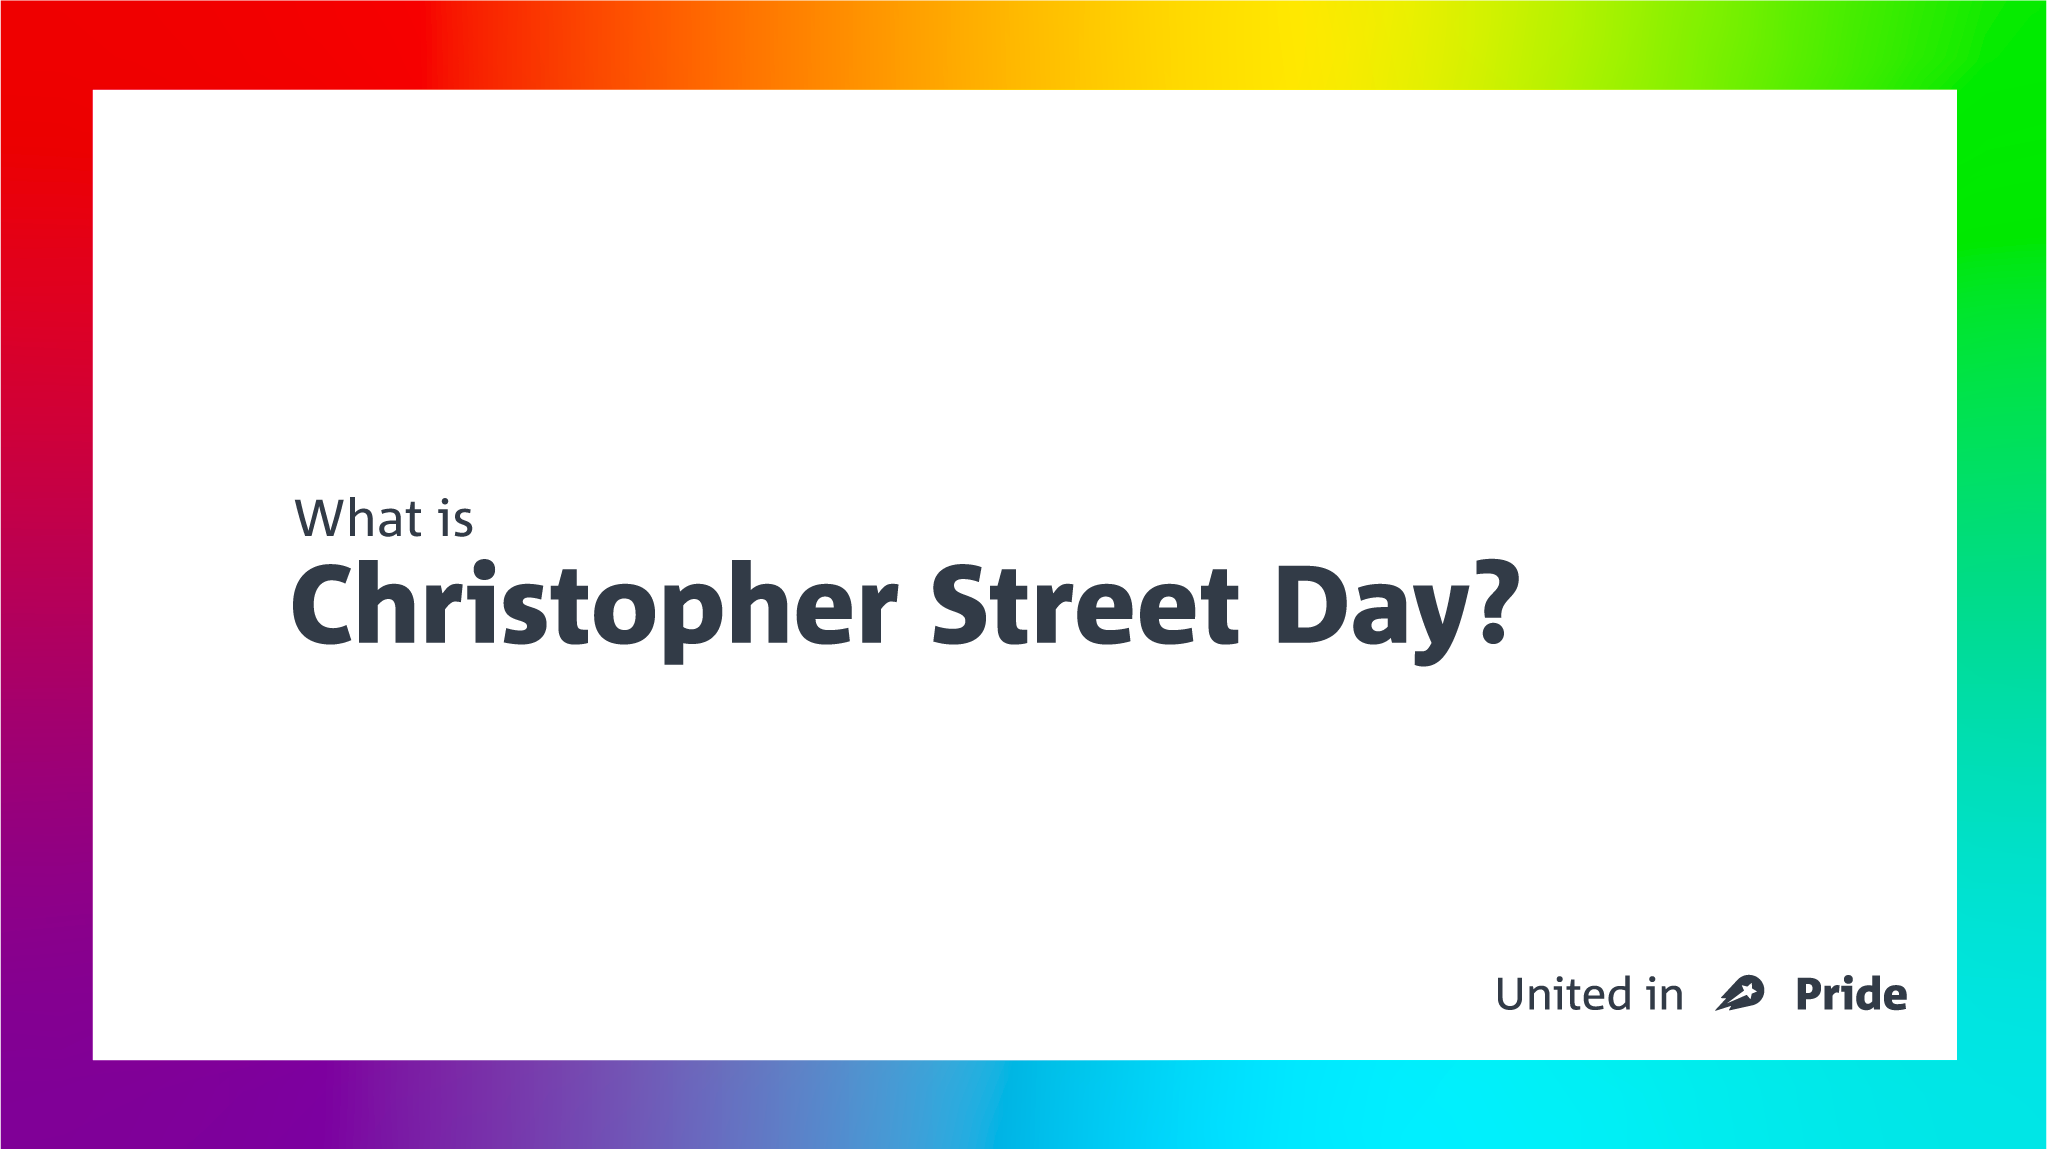 Pride Explained: An in-depth look at the history of Christopher Street Day